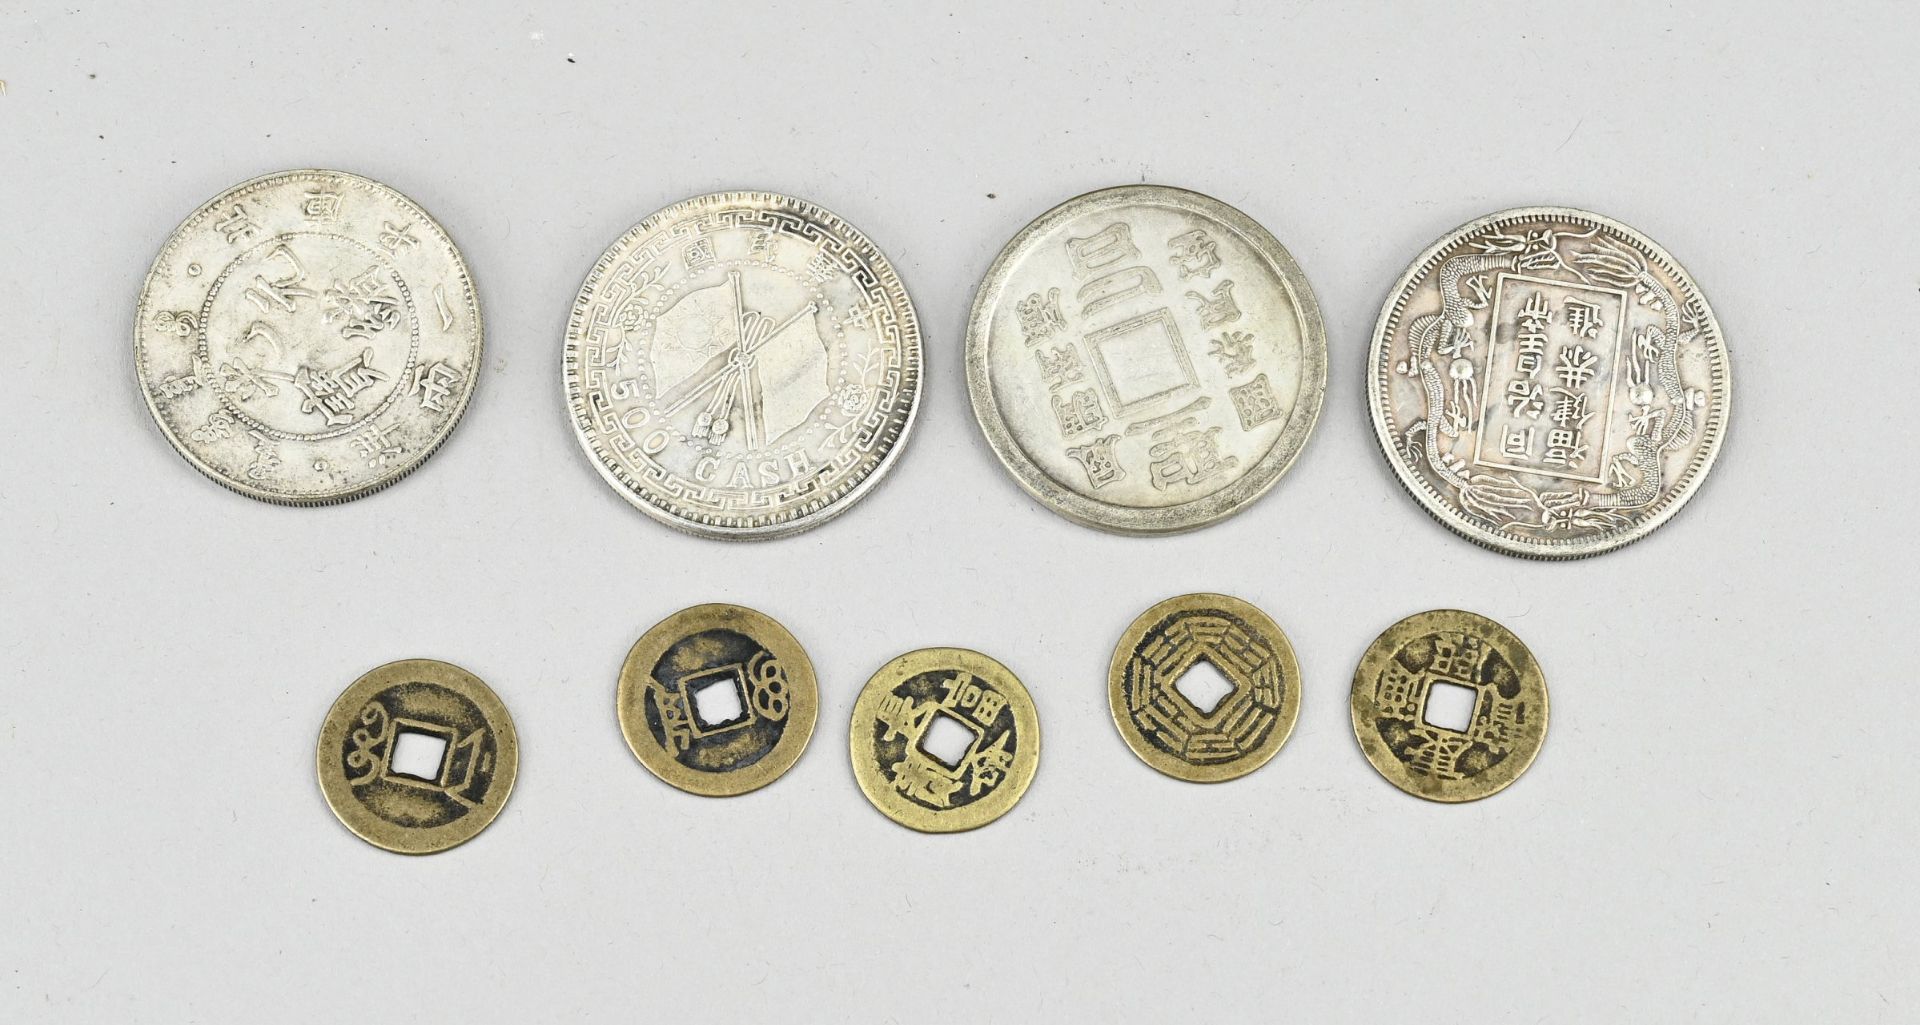 Lot of Chinese coins (9x) - Image 2 of 2